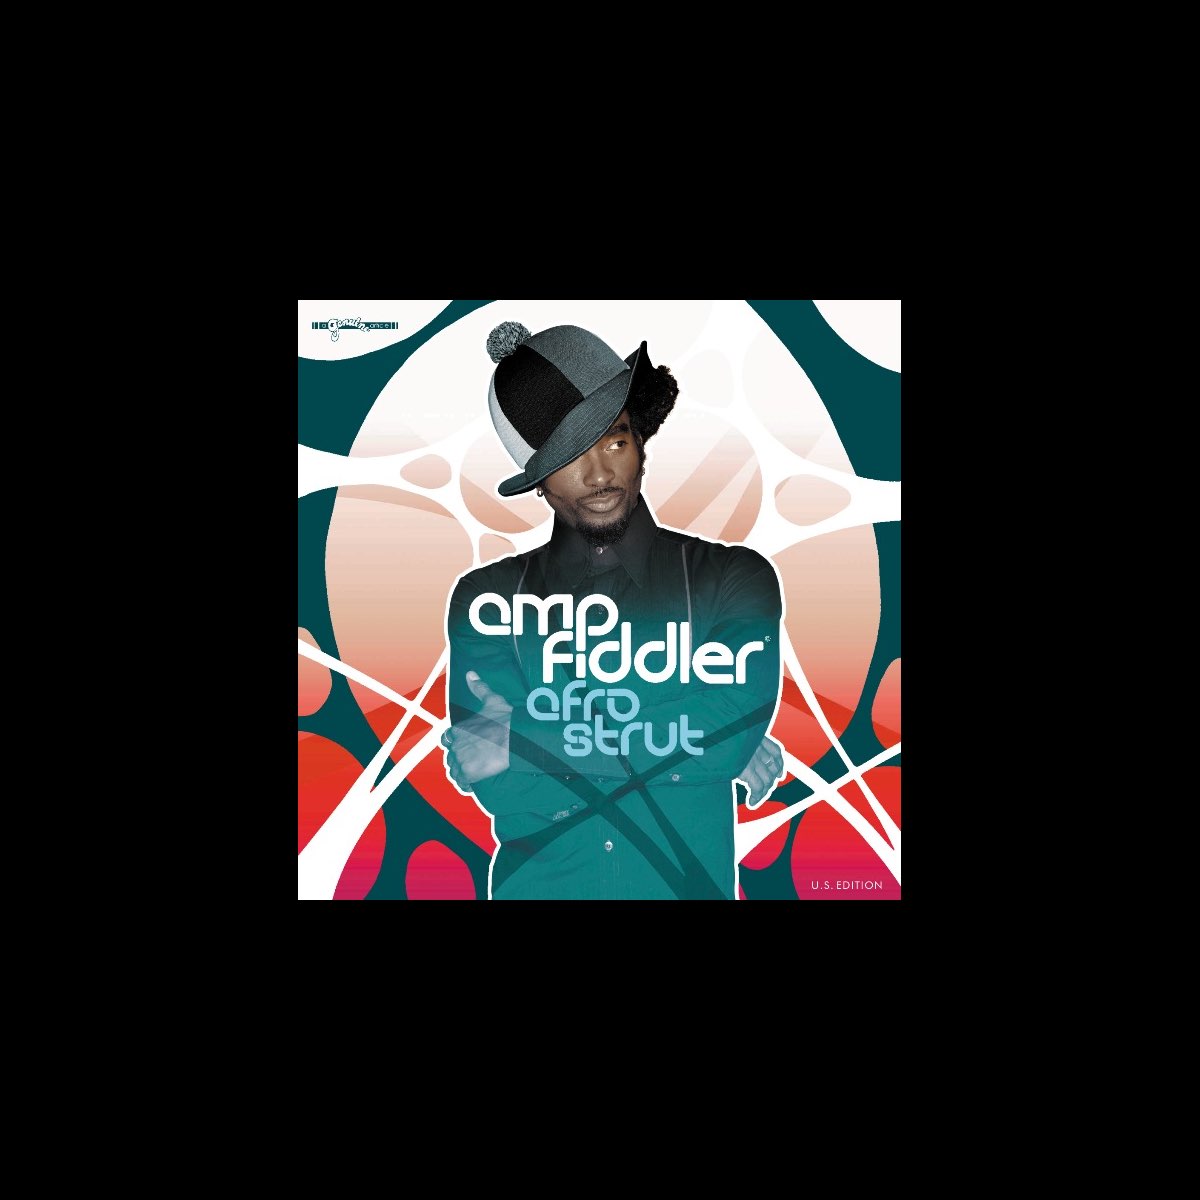 Afro Strut (US Edition) by Amp Fiddler on Apple Music